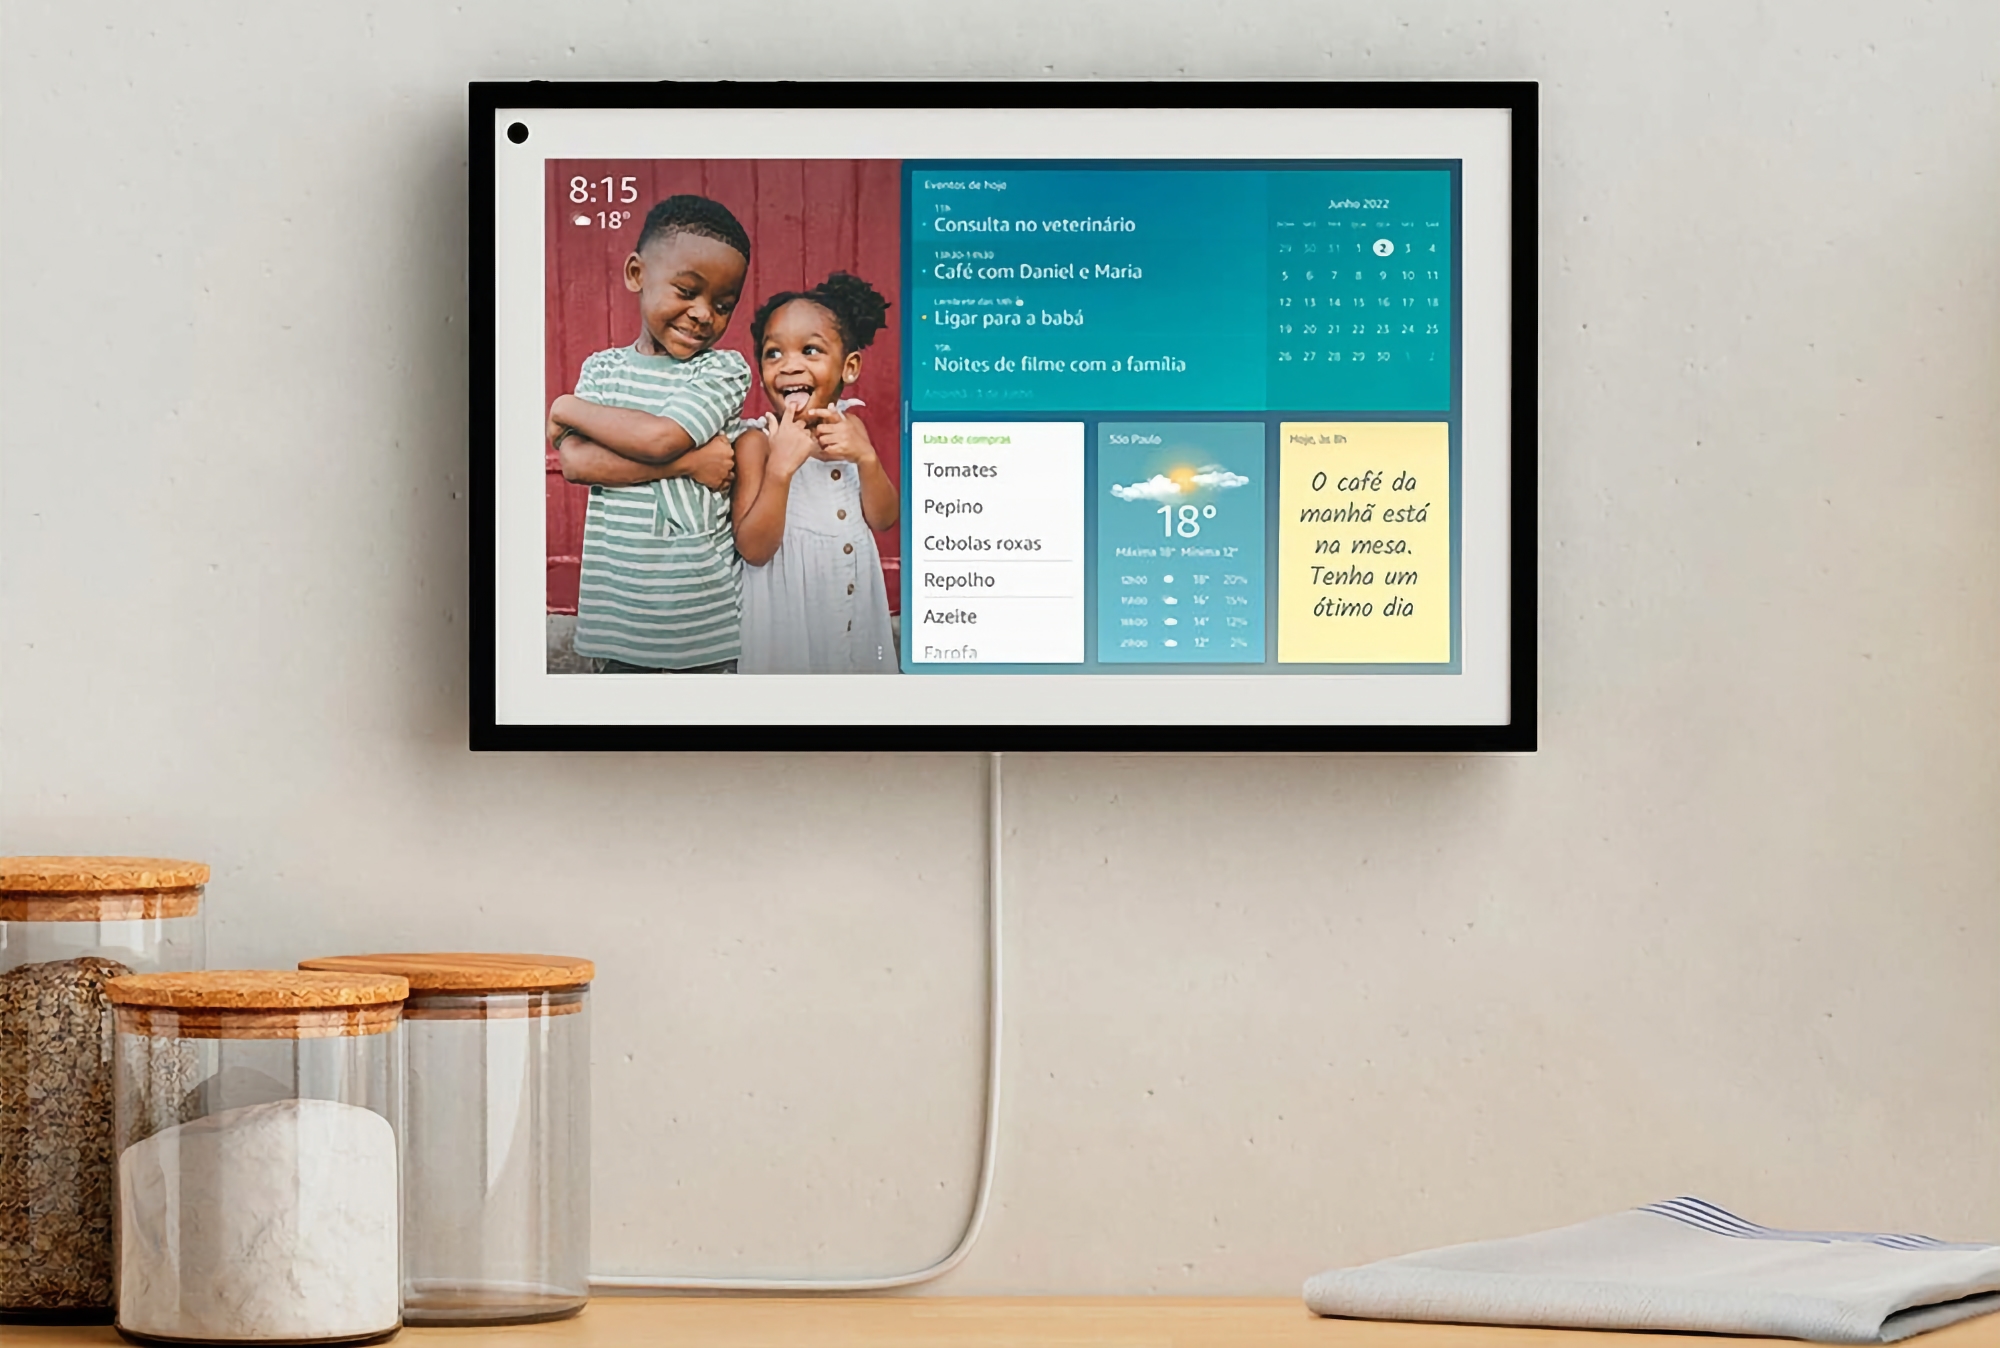 Amazon is selling the Echo Show 15 smart display with a 15.6" screen and Alexa voice assistant for $80 off